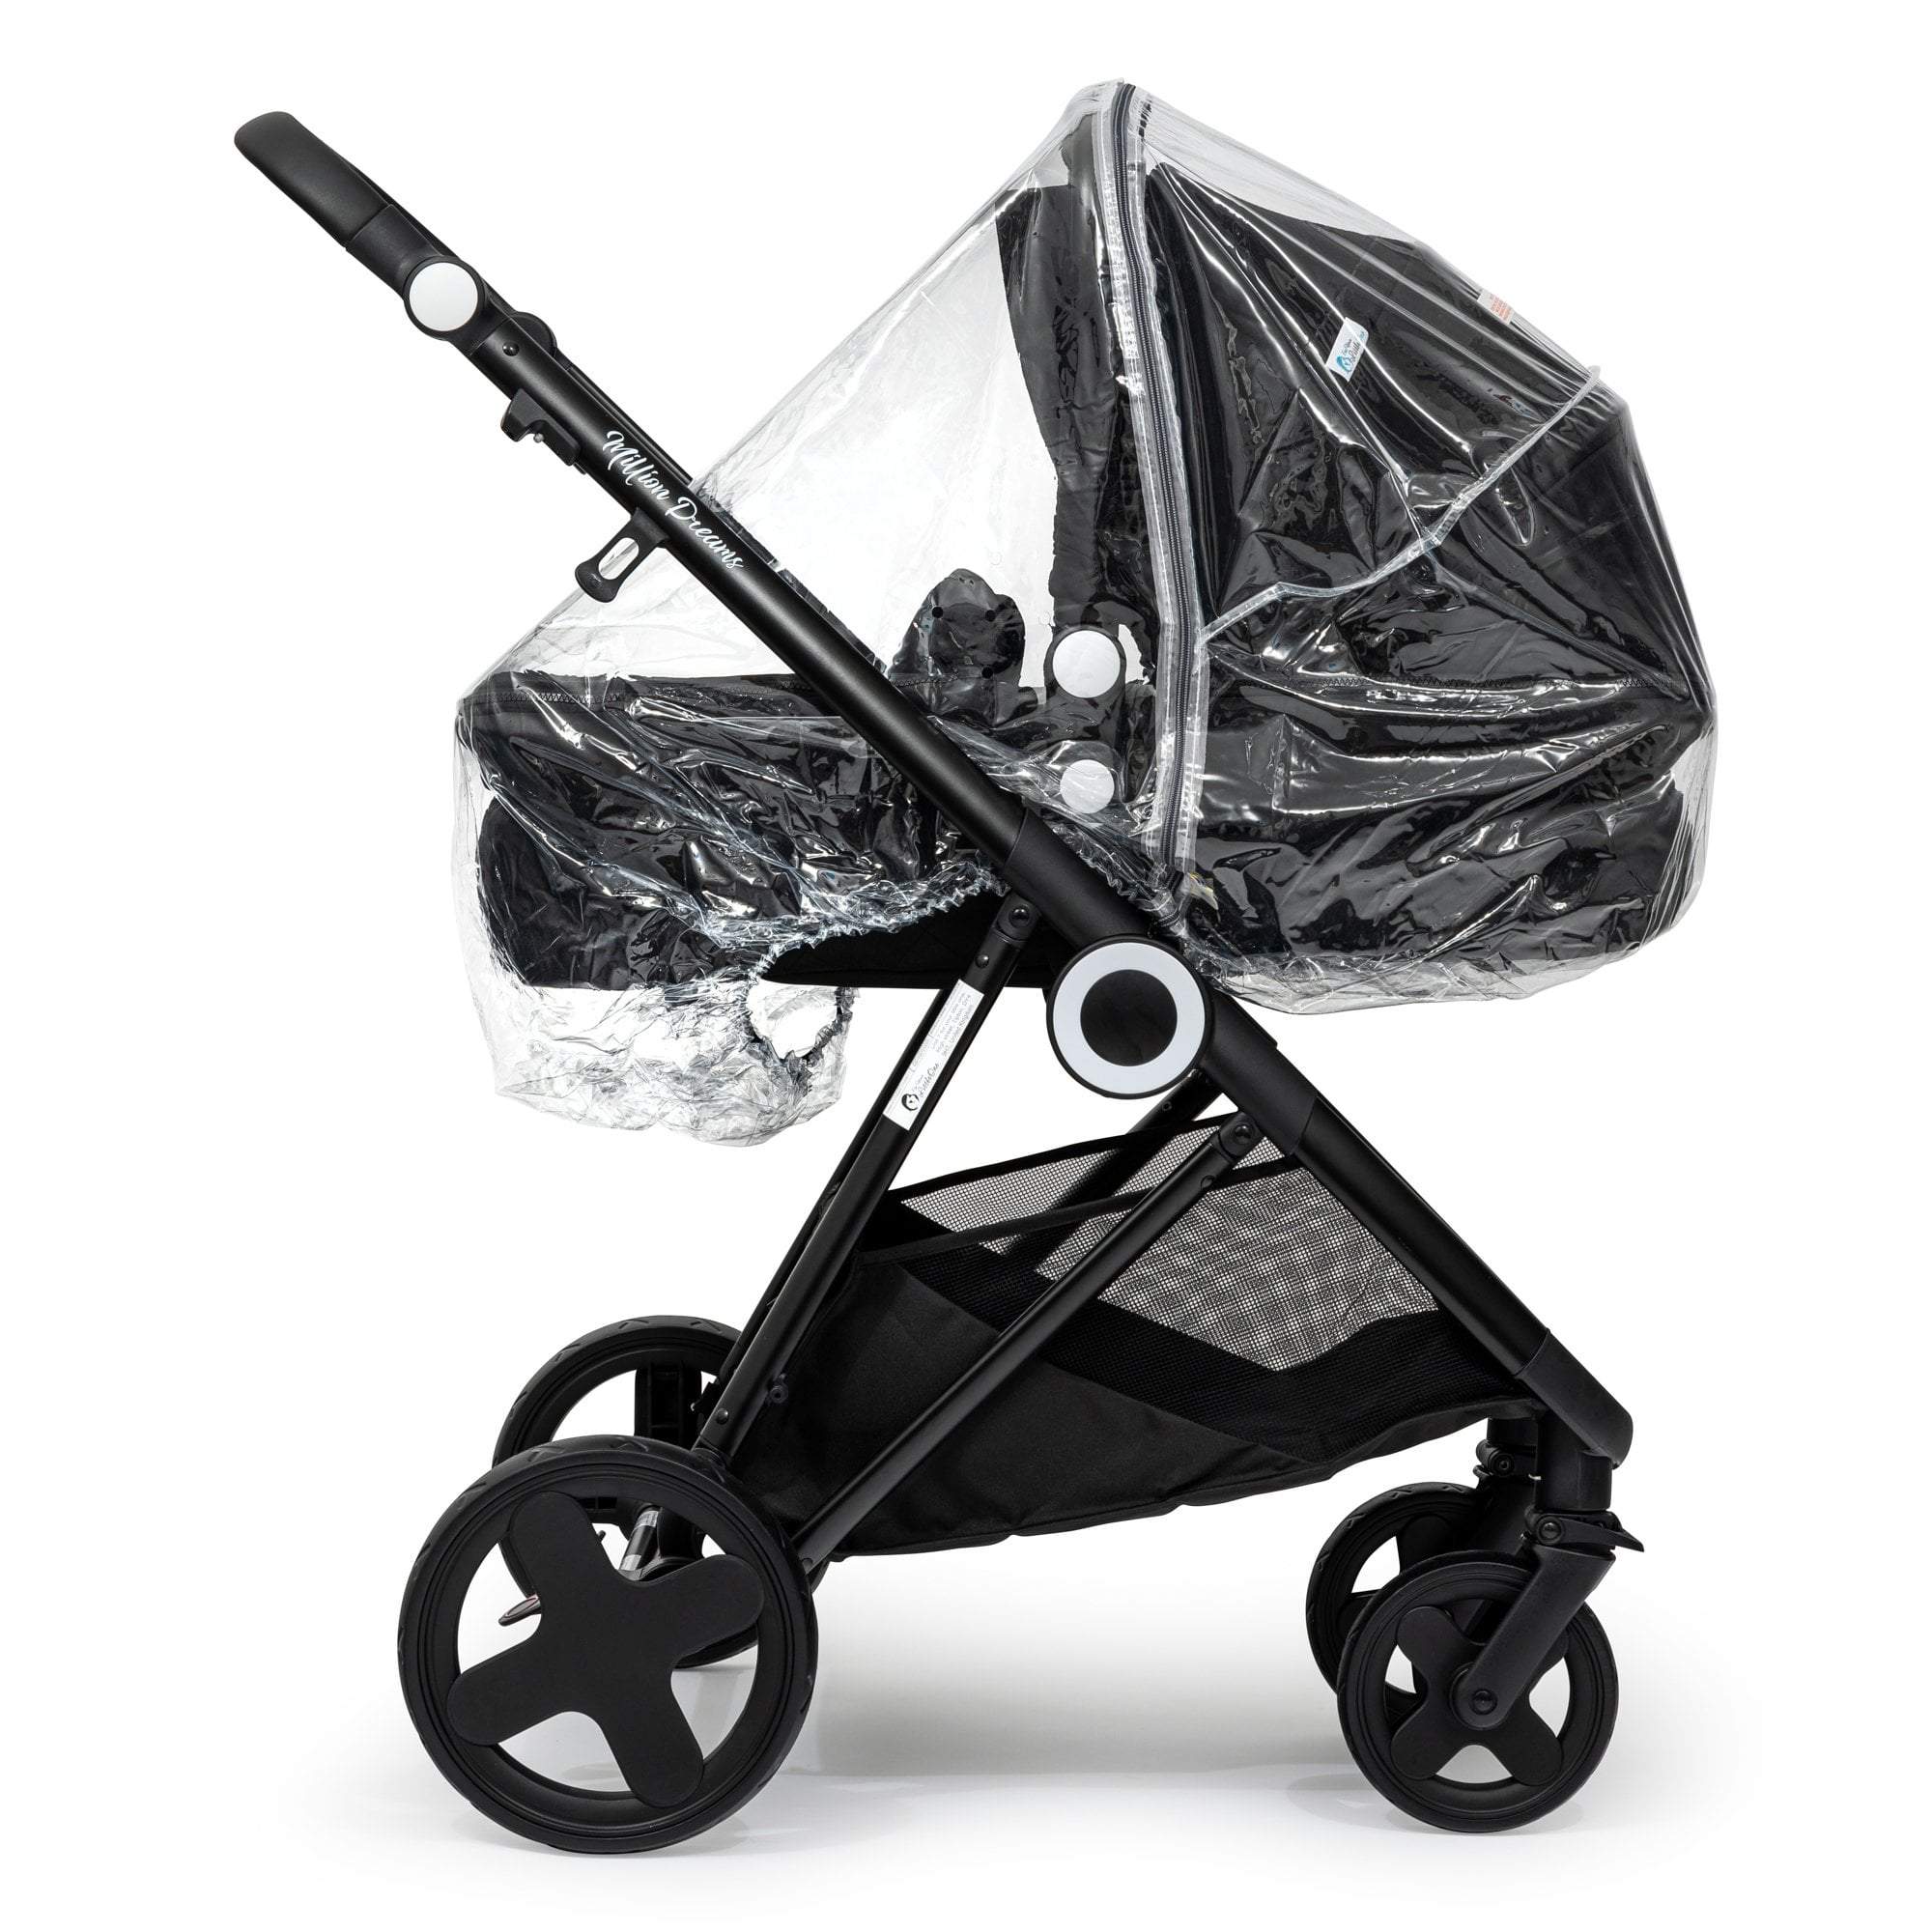 Carrycot Raincover Compatible With Joolz - Fits All Models - For Your Little One